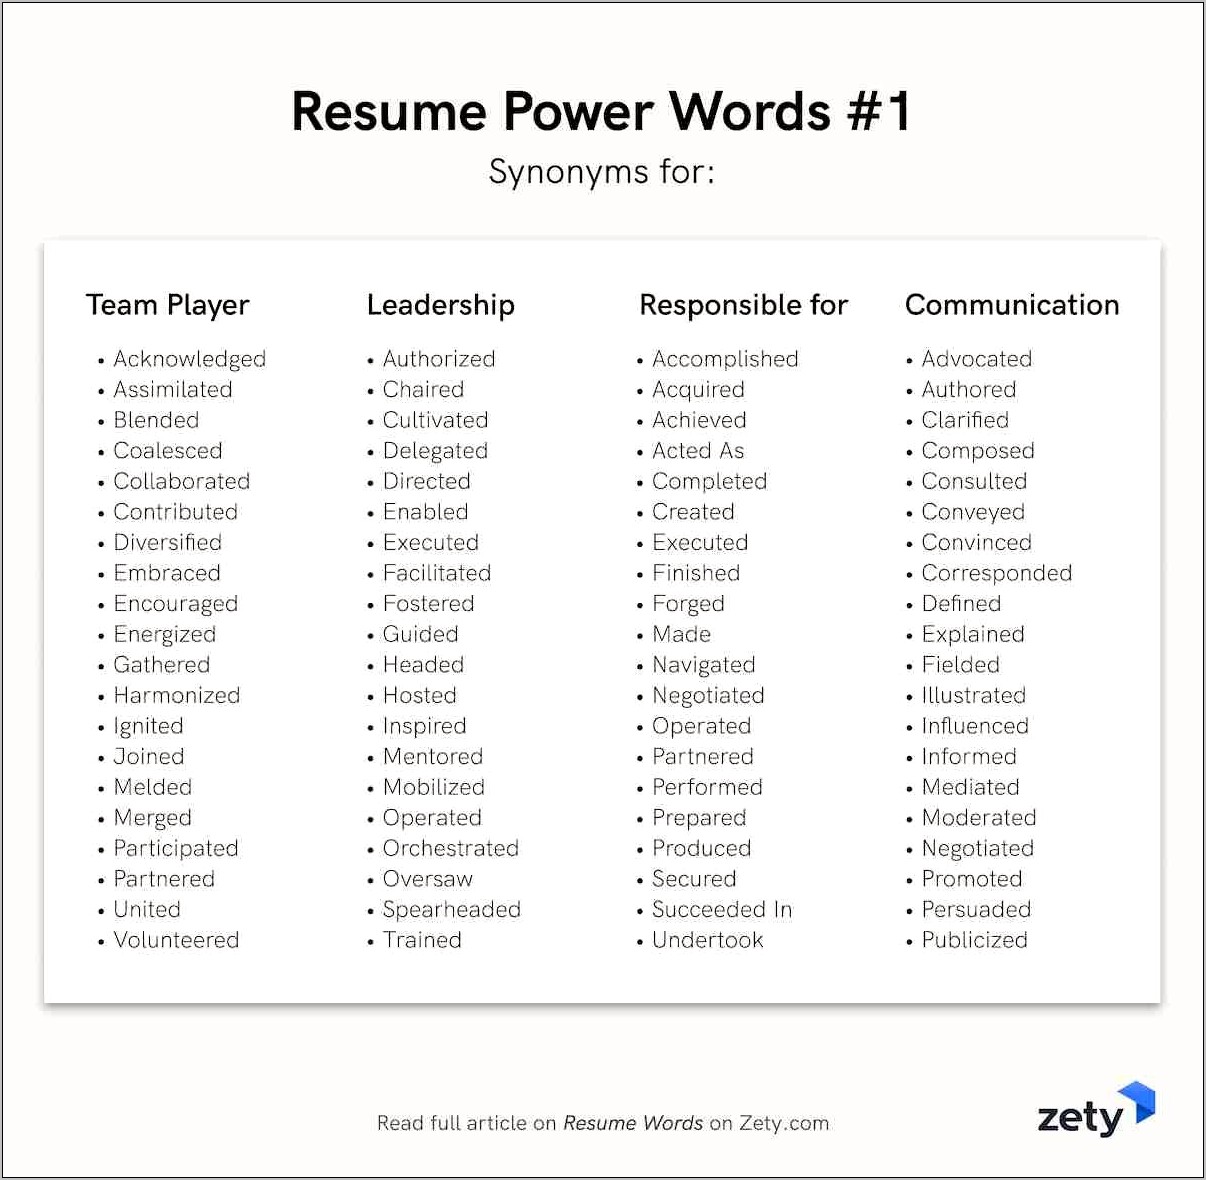 Key Words That Sound Good On A Resume